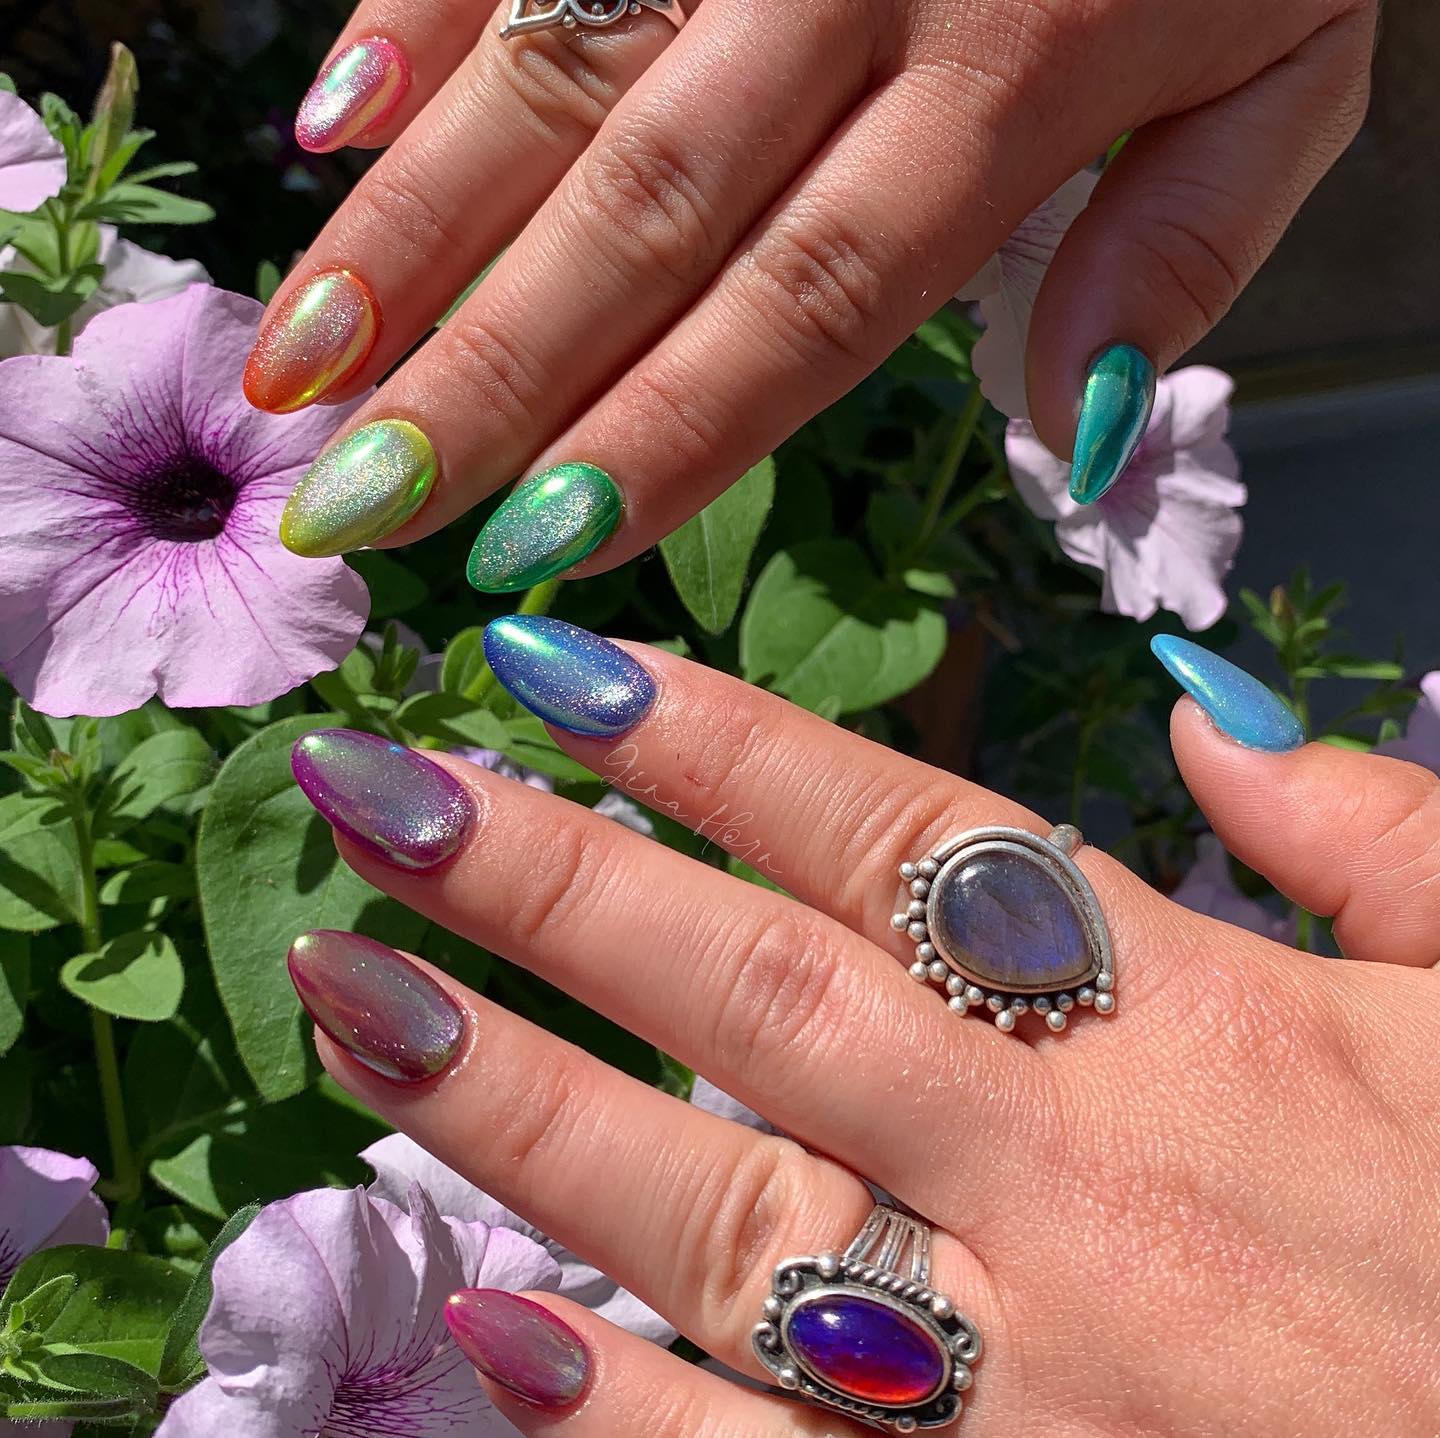 Do you like a variety of colors? For you aurora nails, you can combine different colors to make your nails rock. Especially summer colors look perfect.